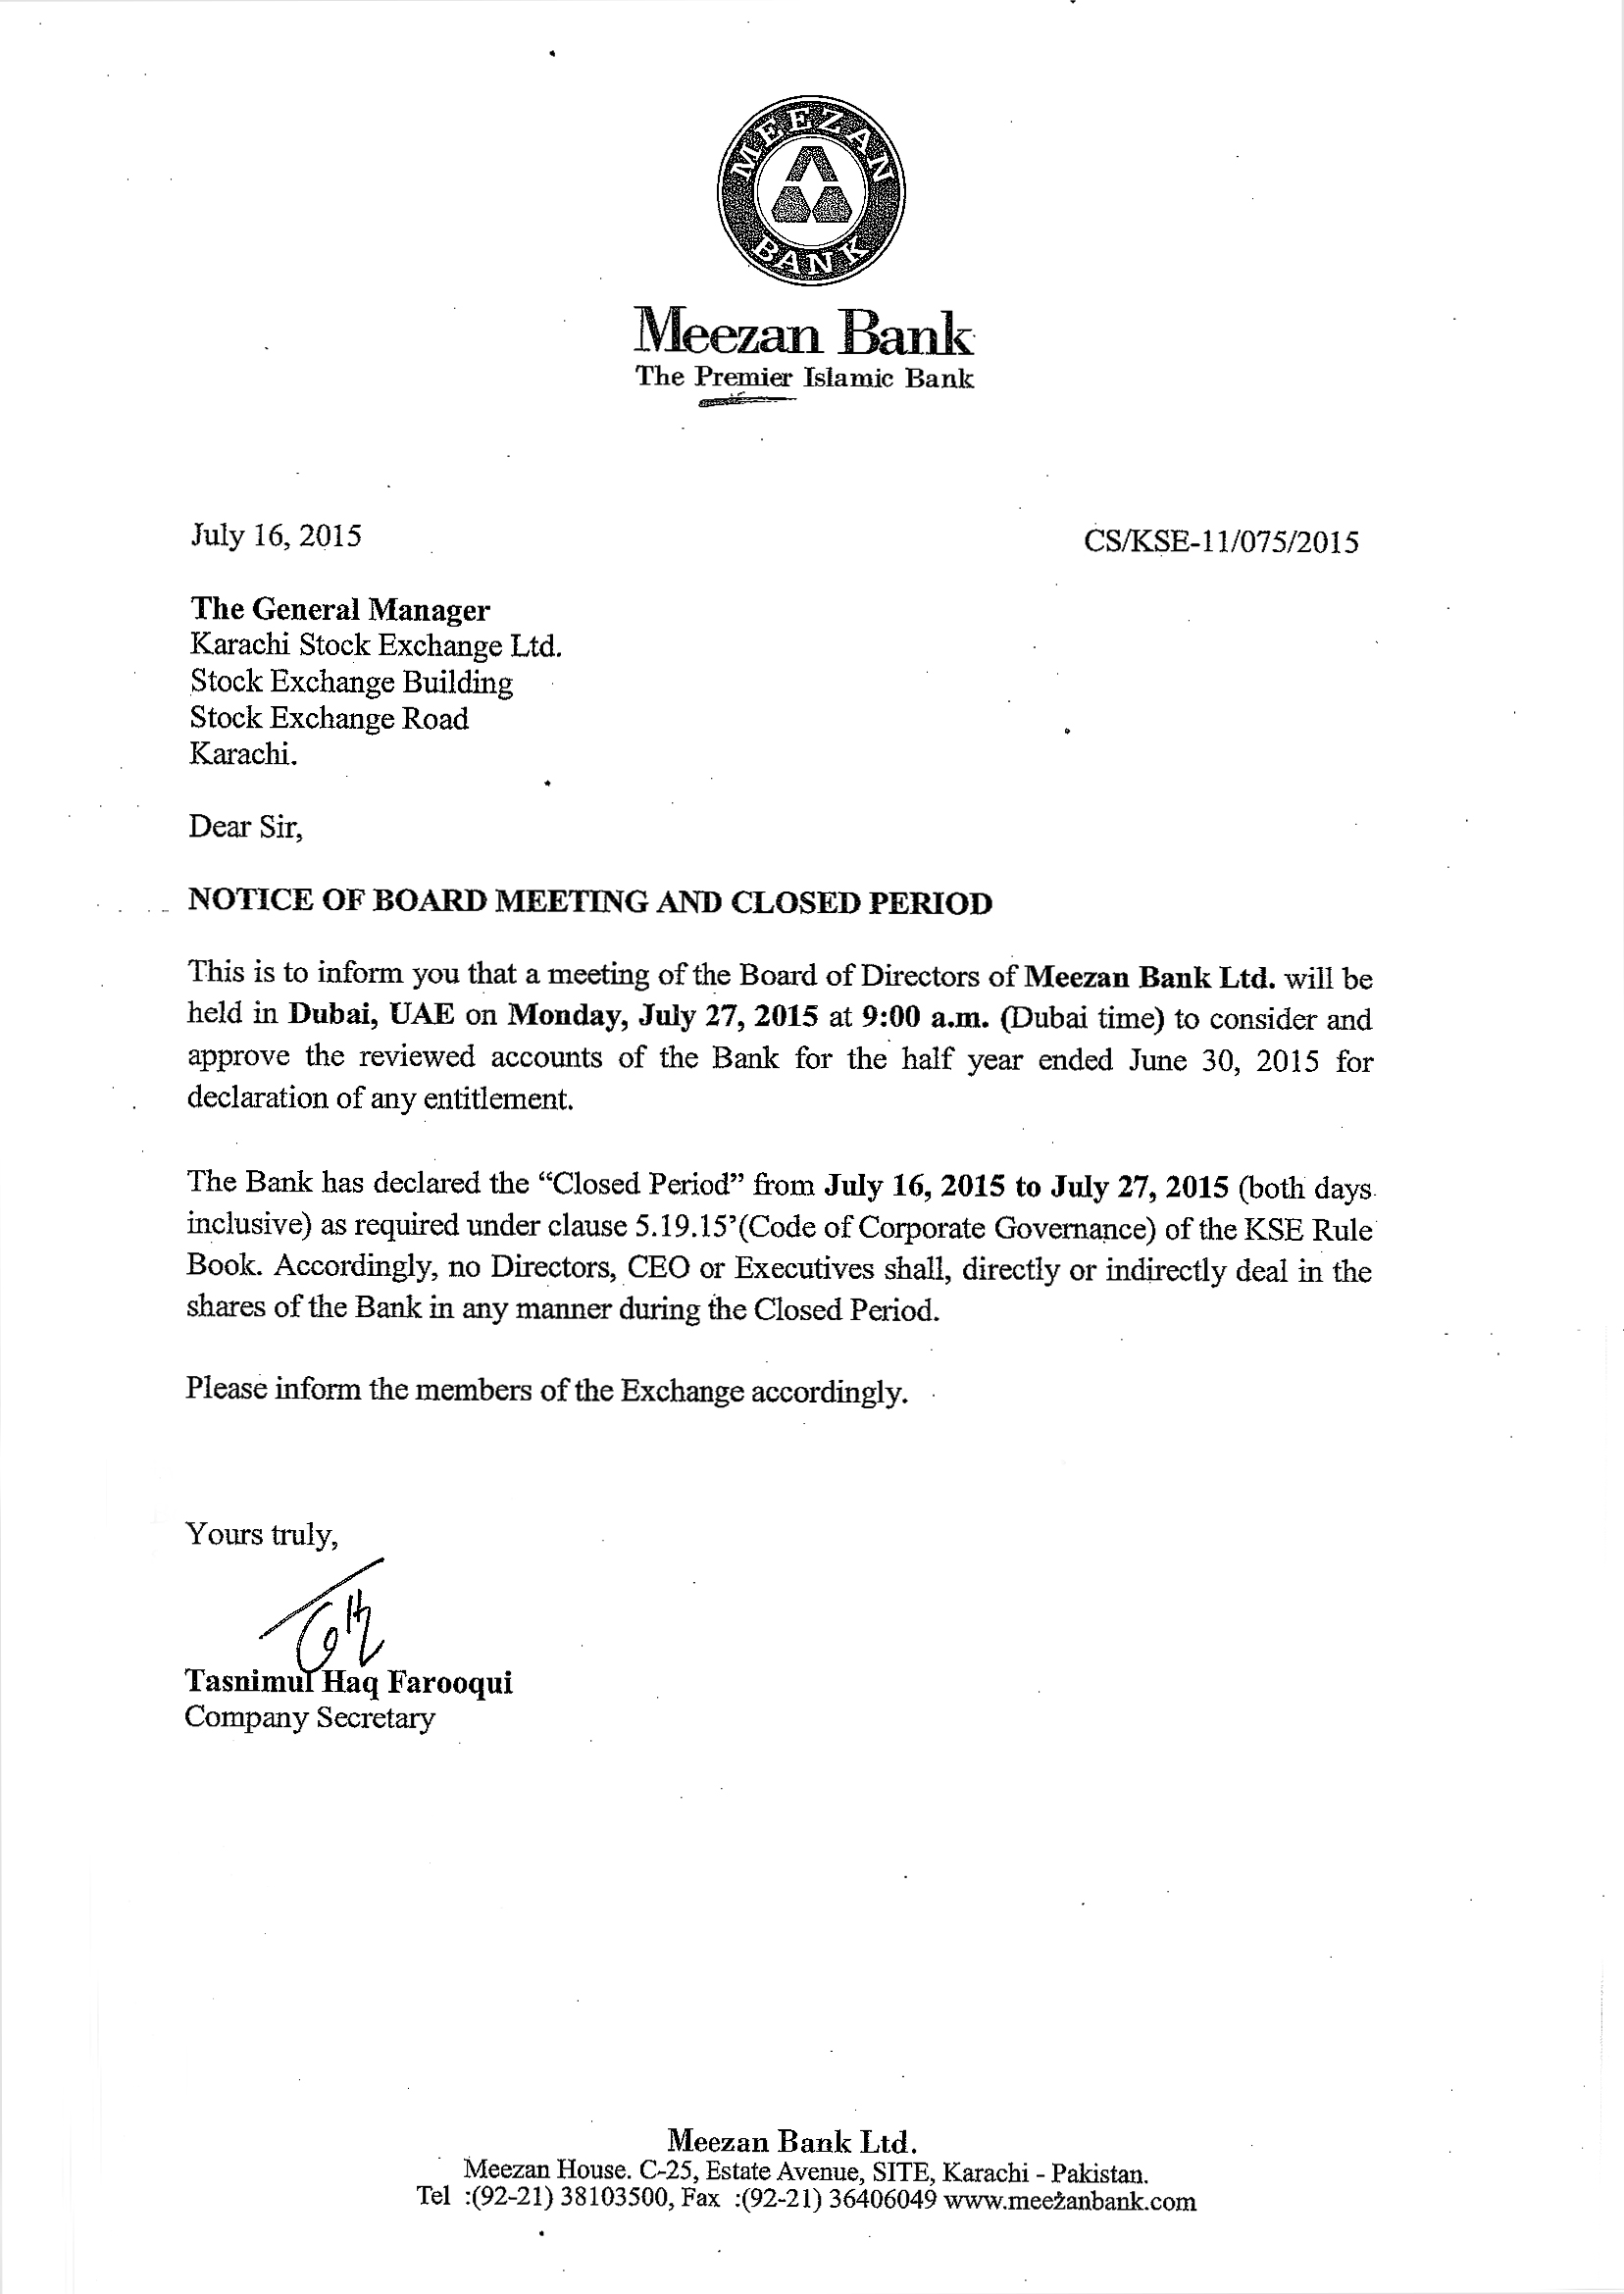 Notice of Board Meeting and Closed Period 2015